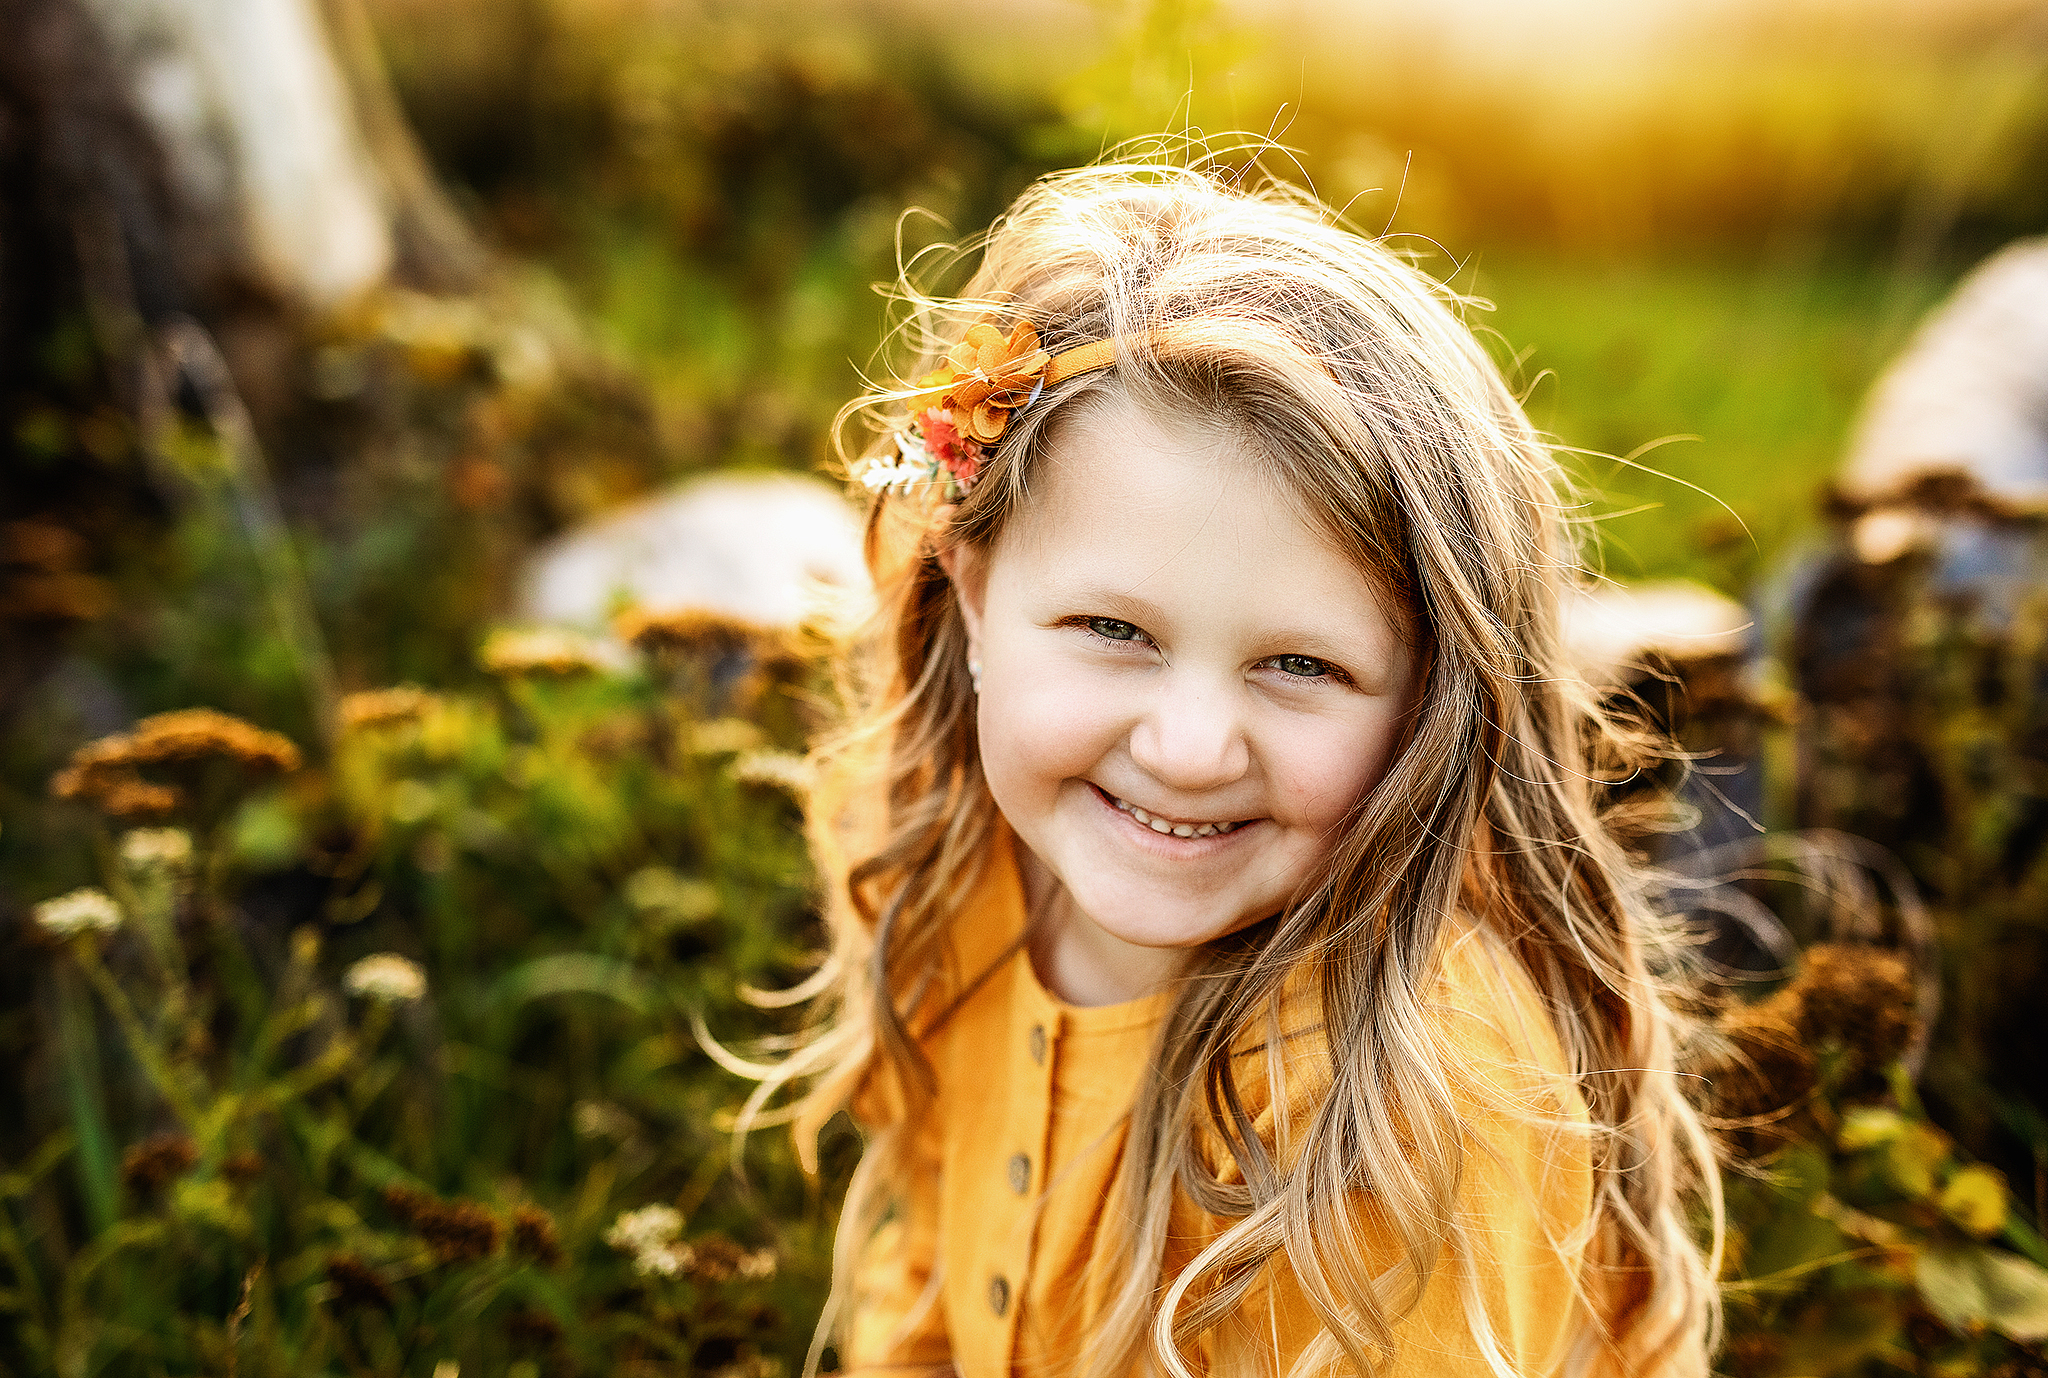 Young girl sitting on log and grinning in yellow dress